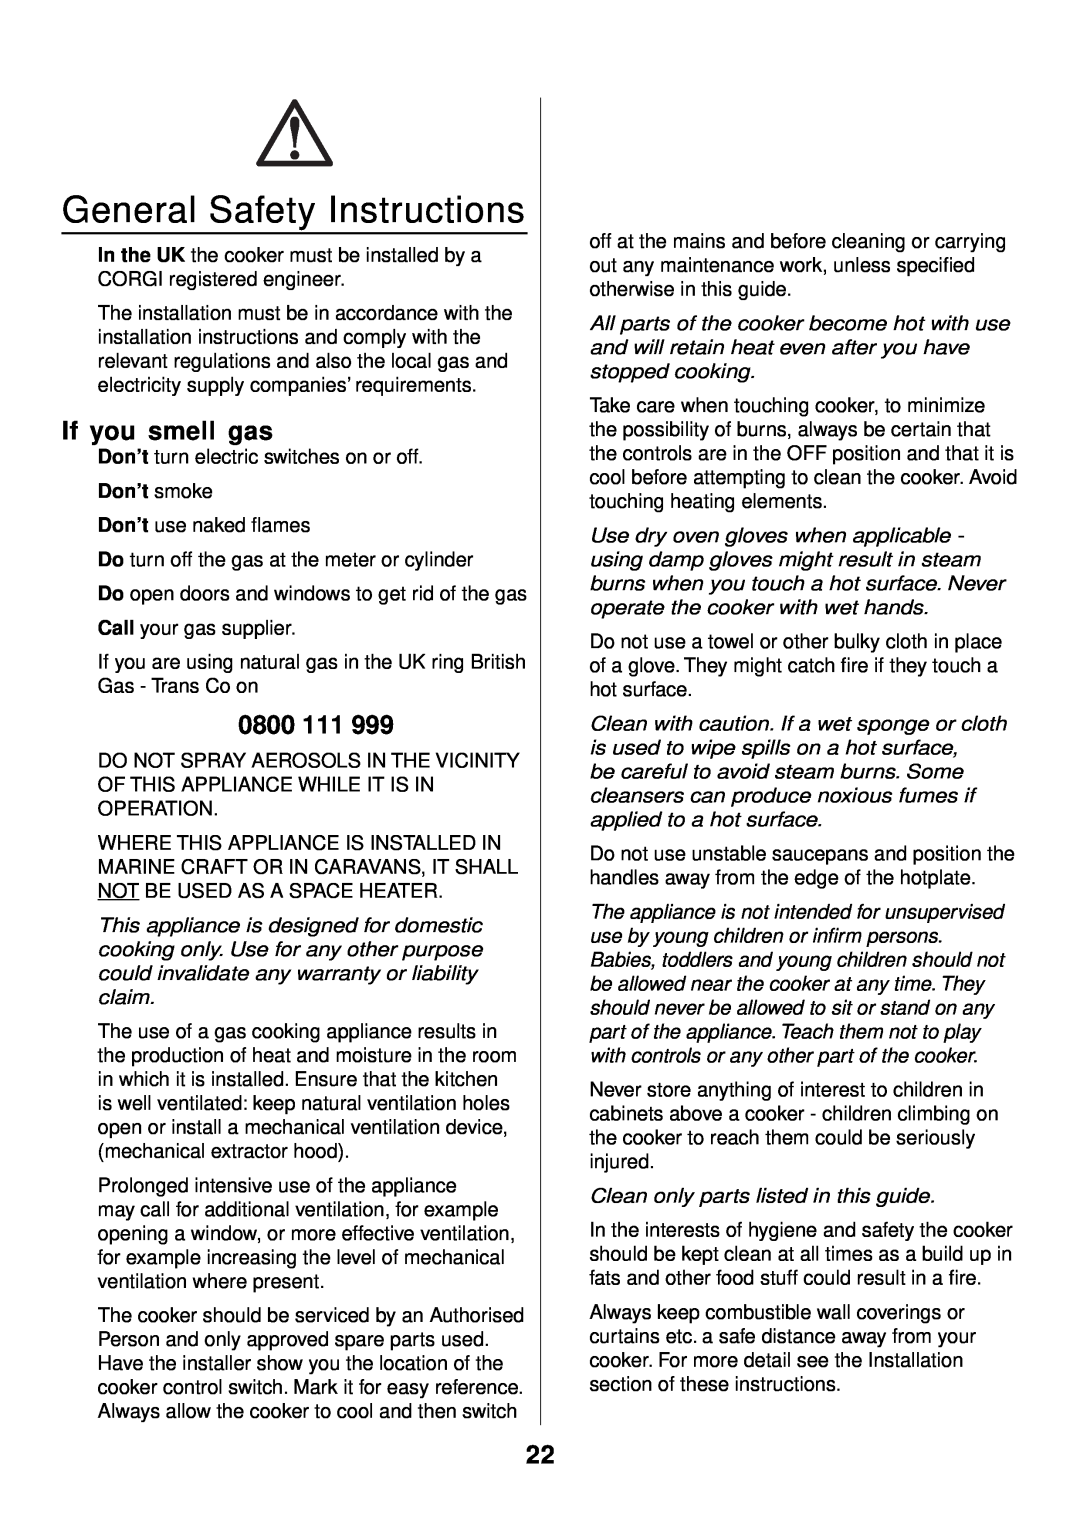 Rangemaster 90 Gas manual General Safety Instructions, If you smell gas, 0800 